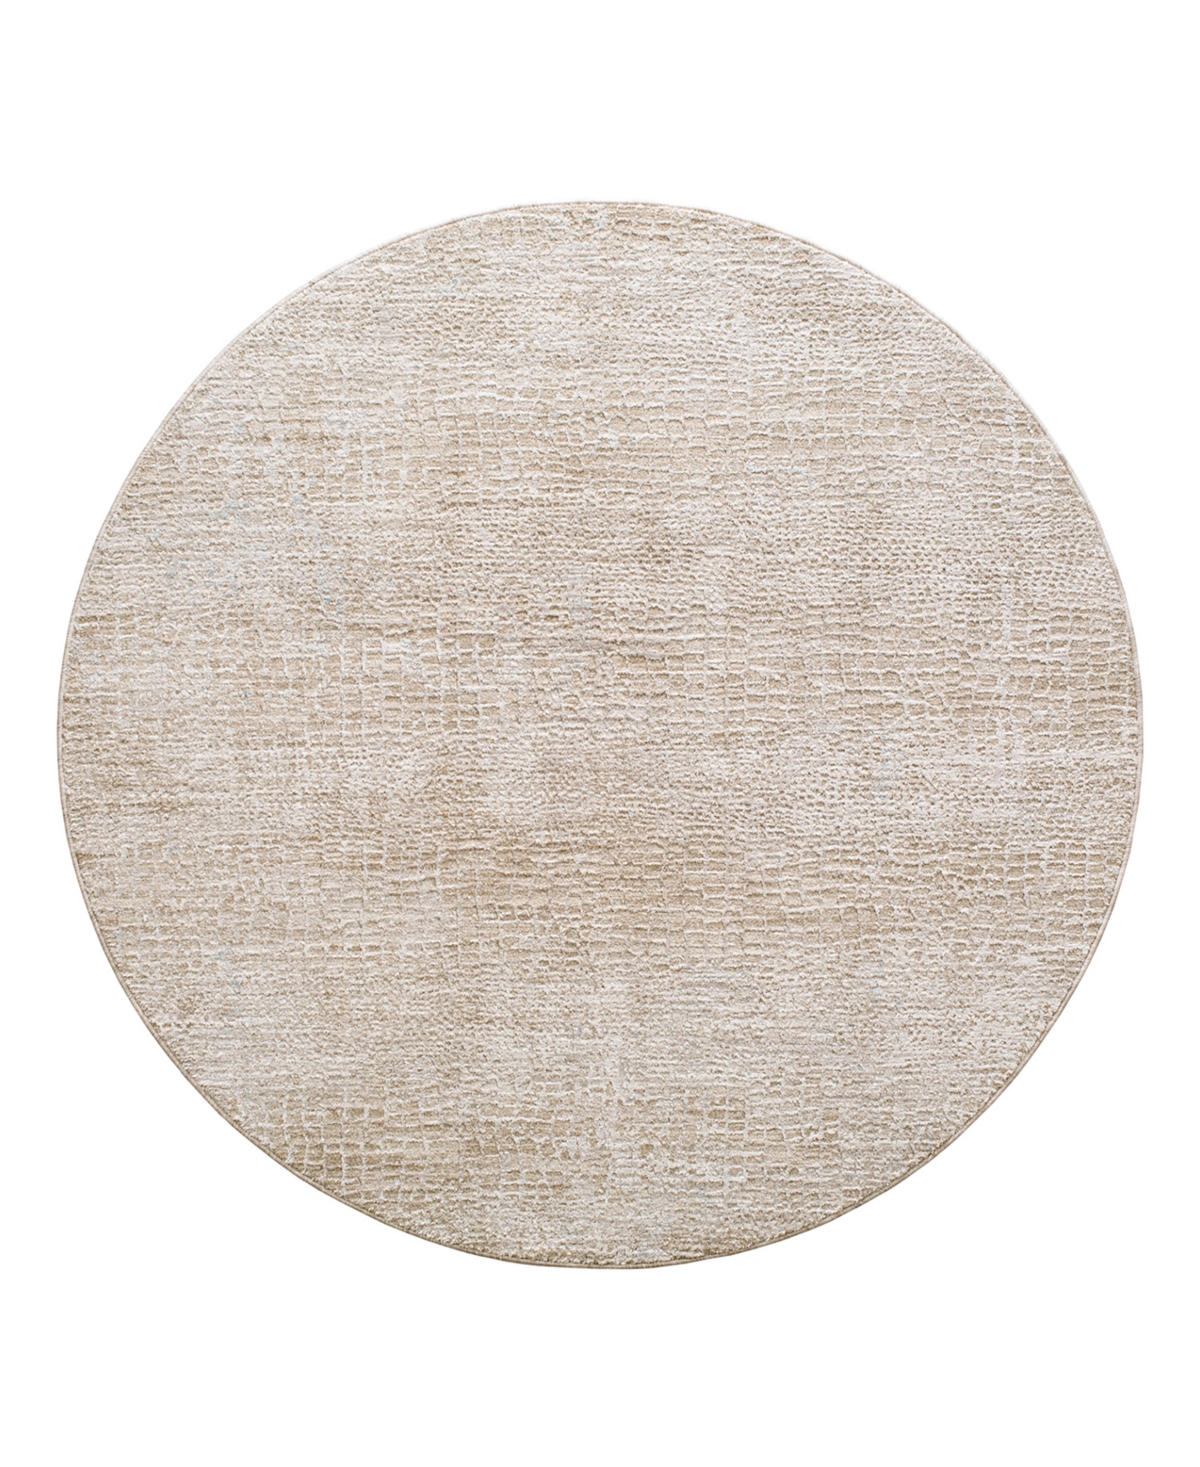 Surya Masterpiece High-Low Mpc-2306 7'10in x 7'10in Round Area Rug - Taupe